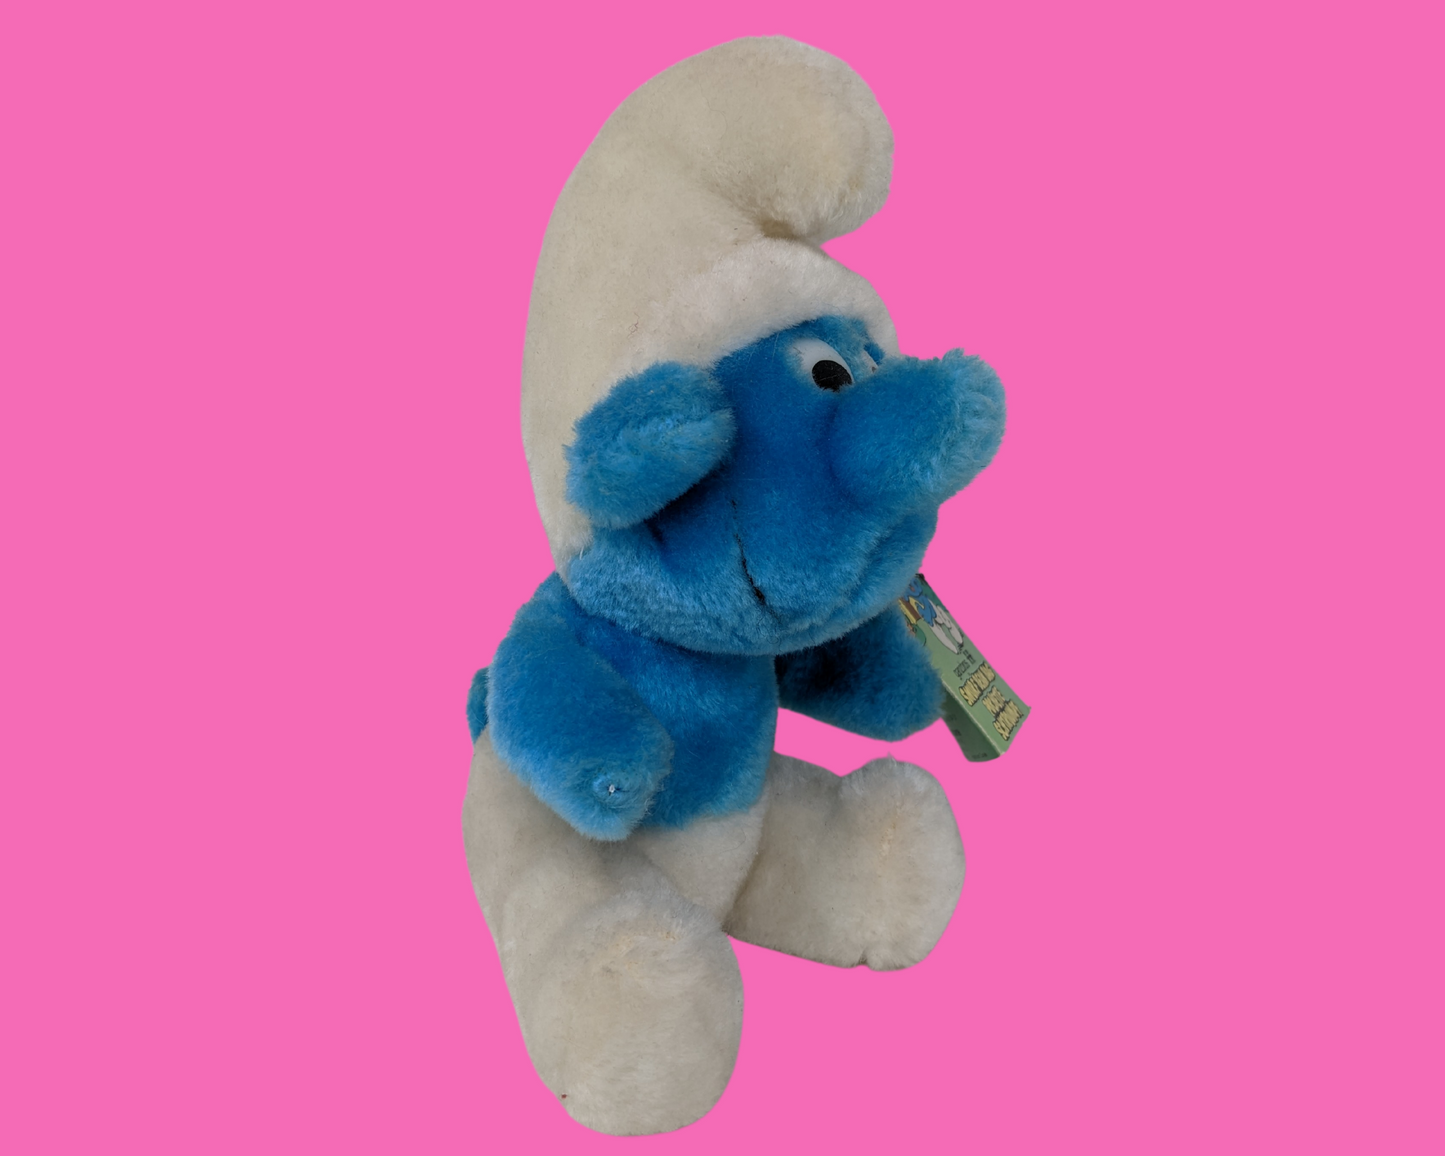 Vintage 1980's The Smurfs Small Plush Toy